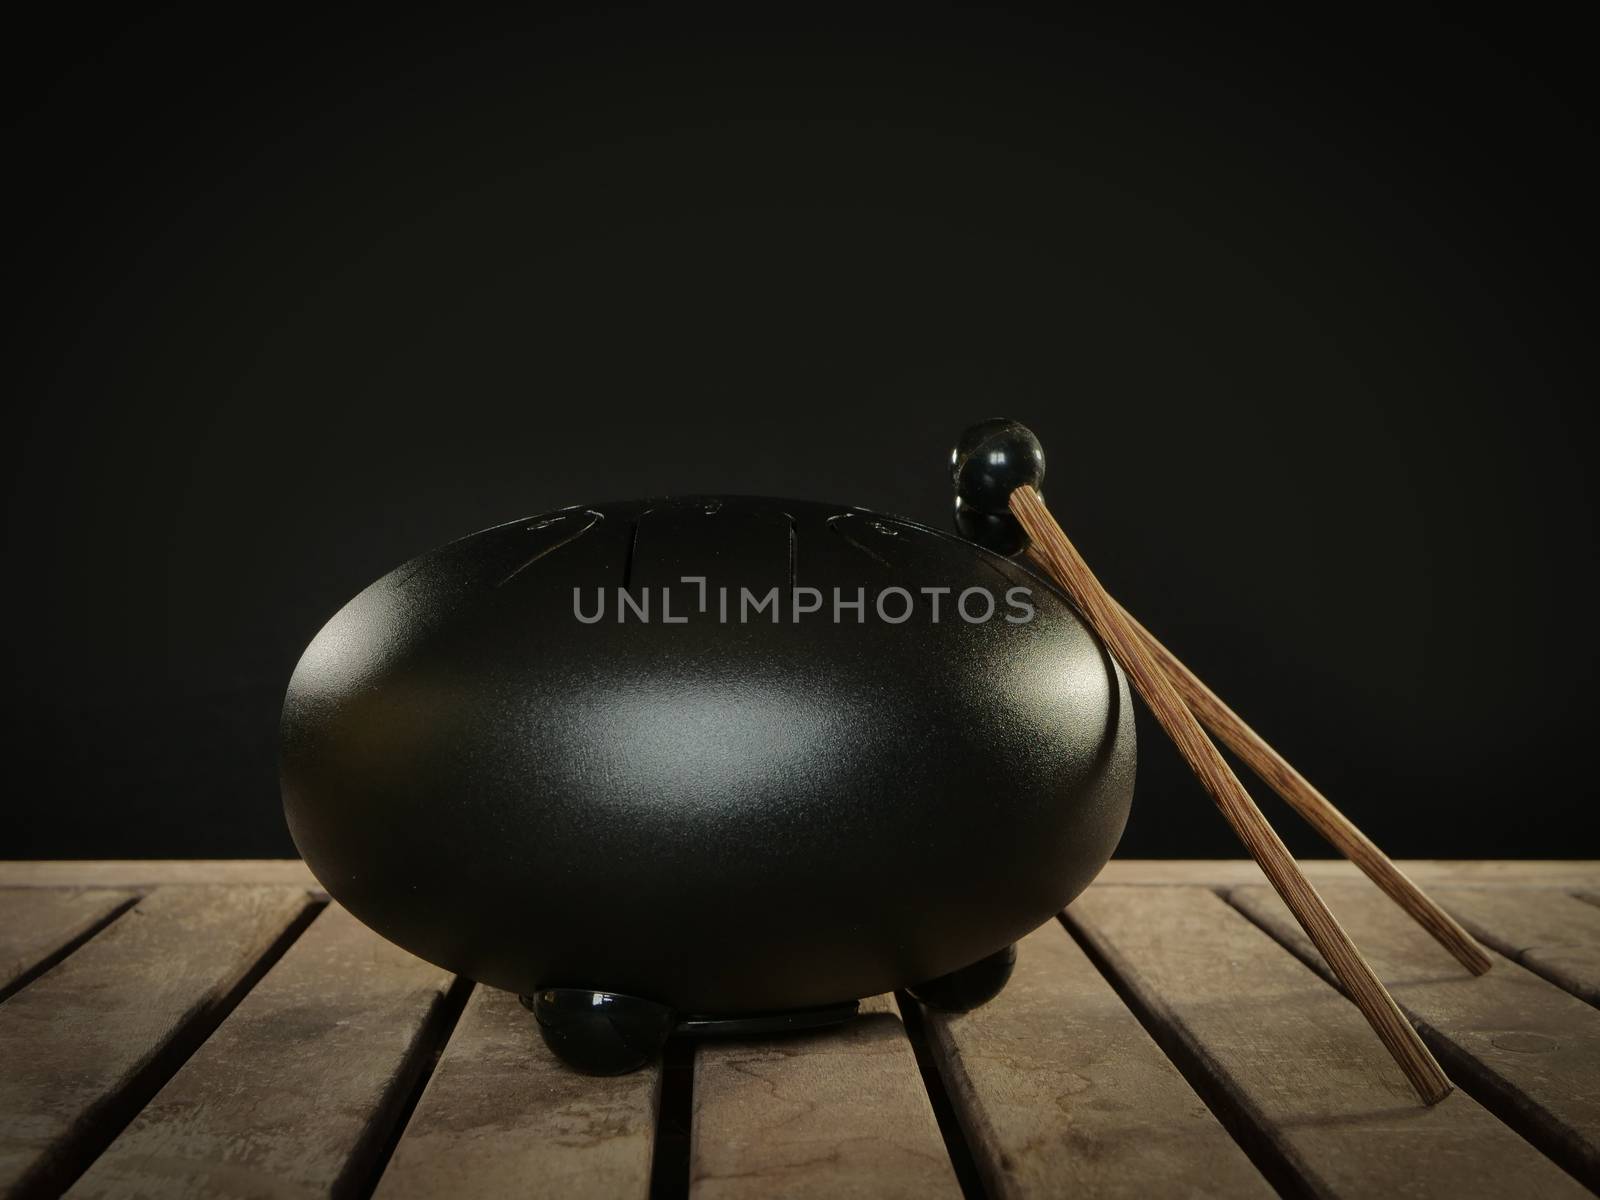 Steel tongue drum on wooden surface and black background by HD_premium_shots